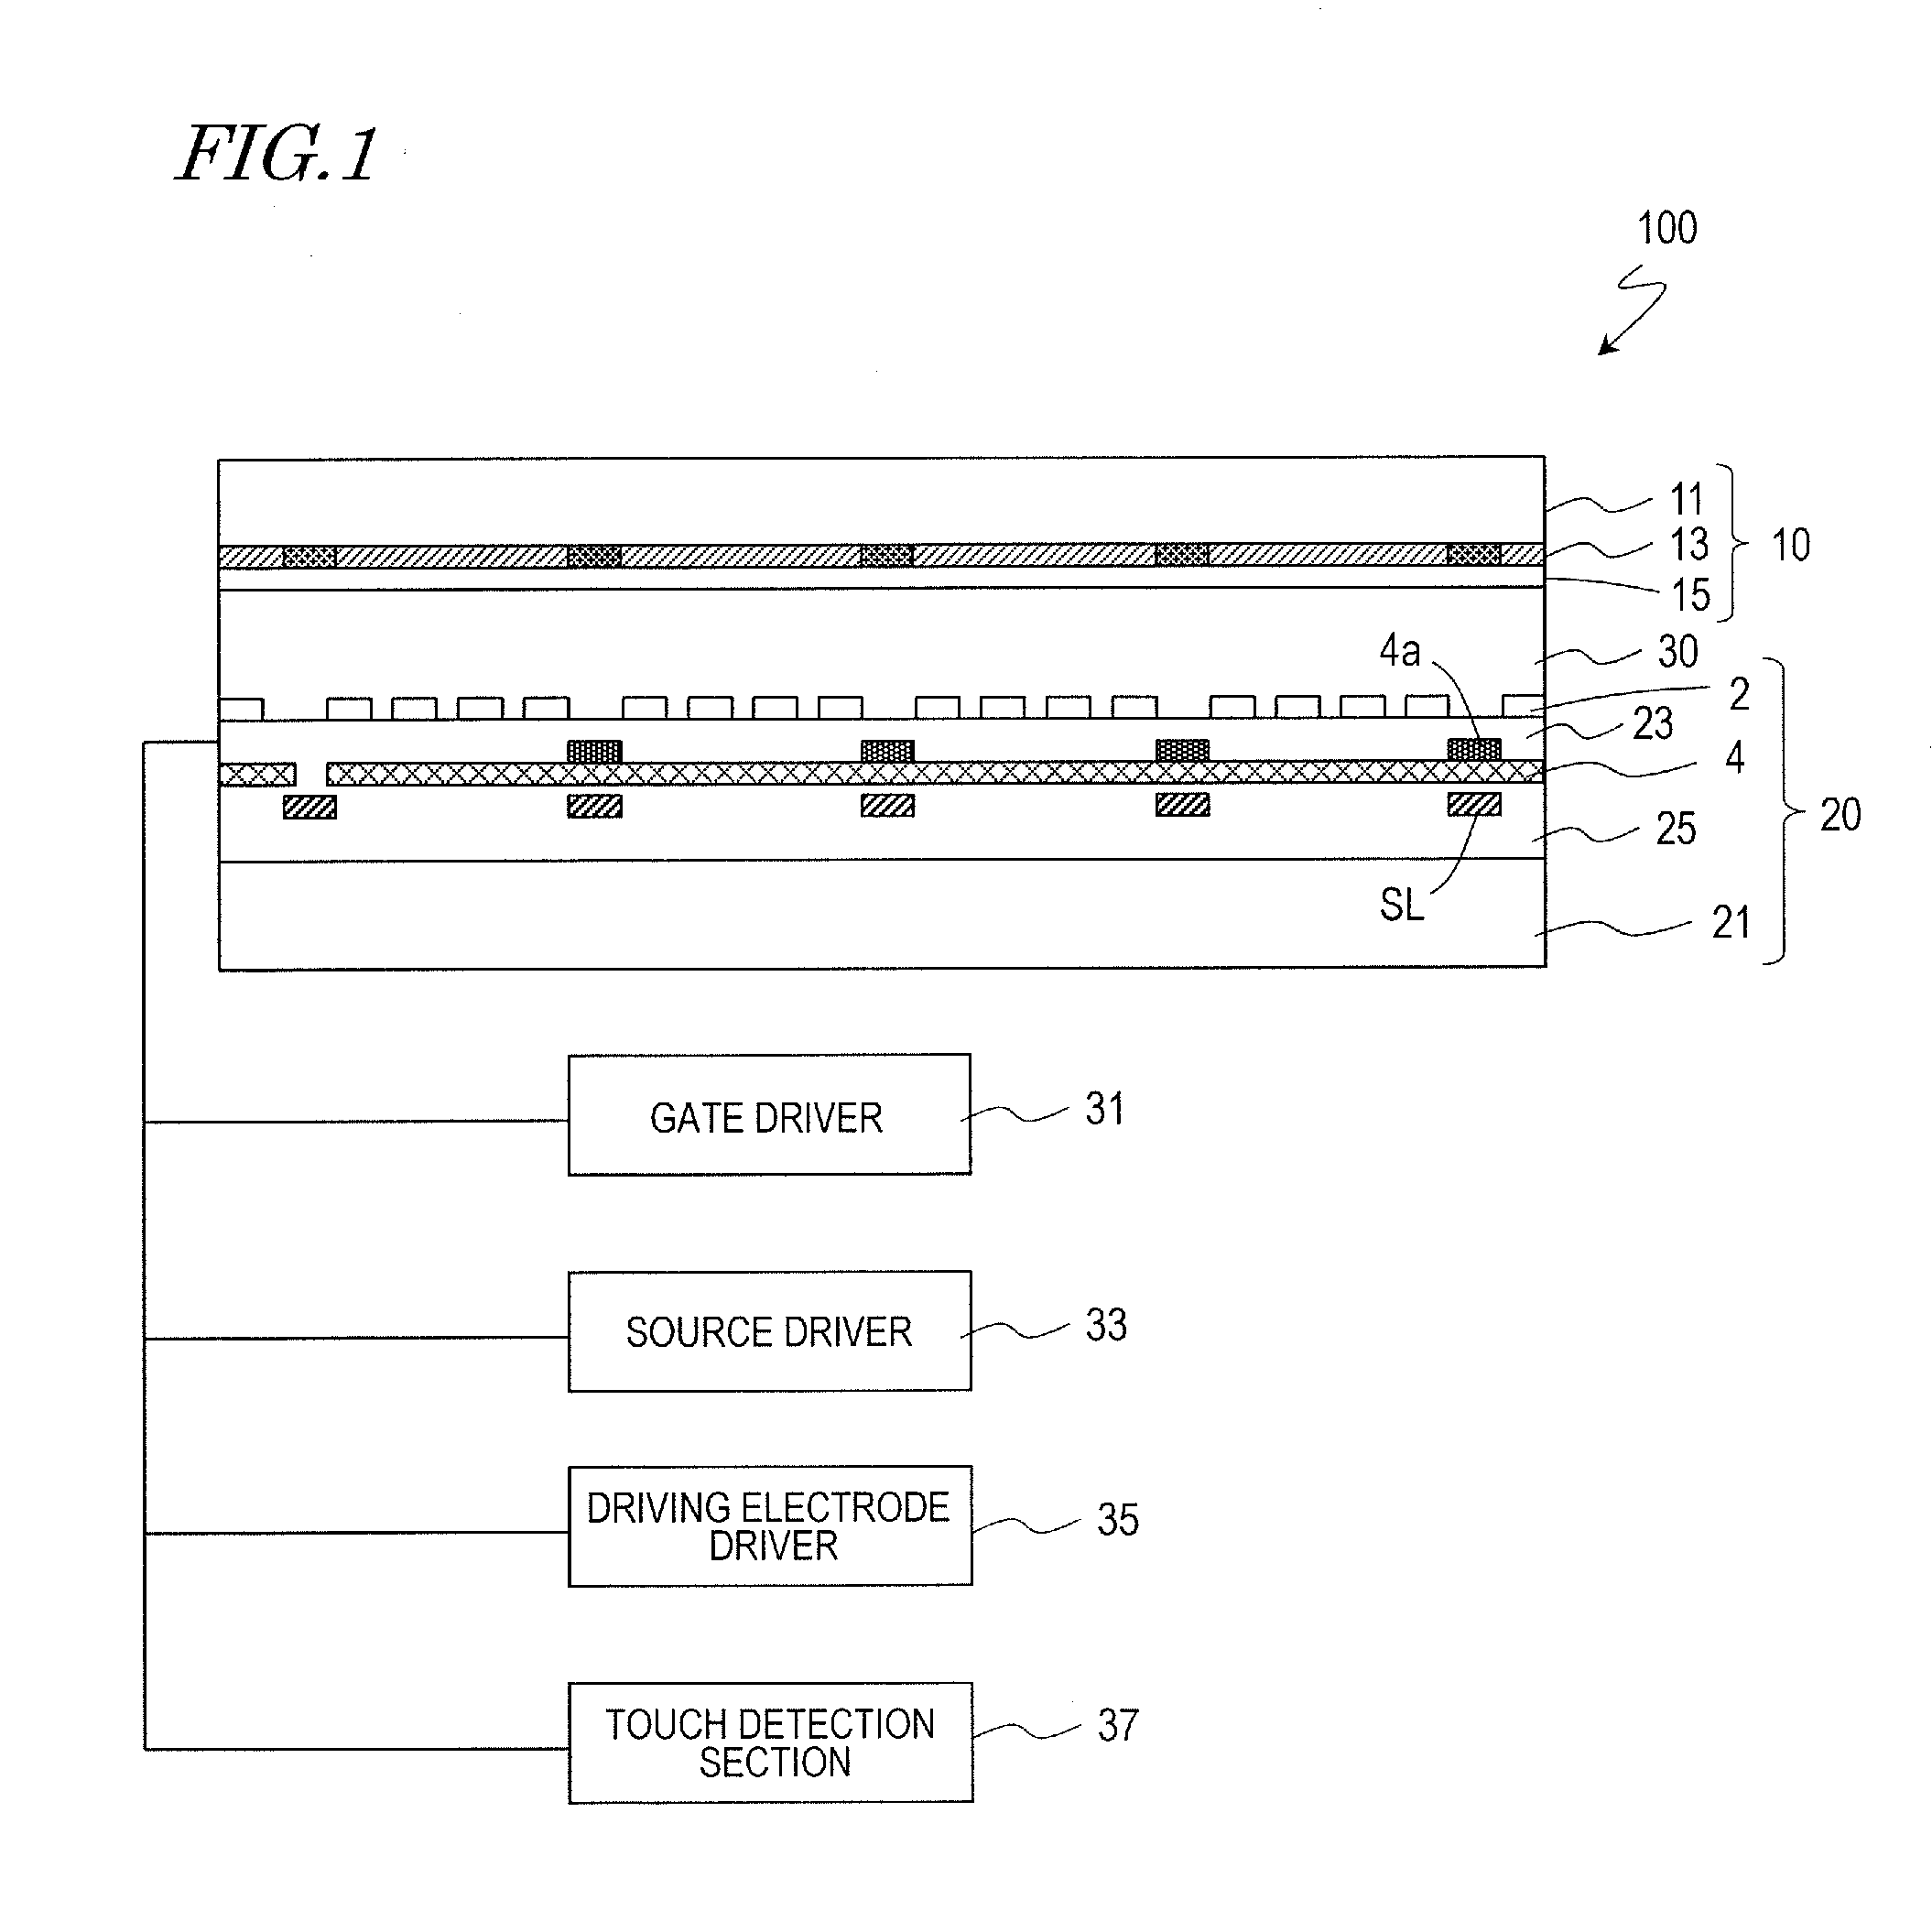 Display device with touch sensor